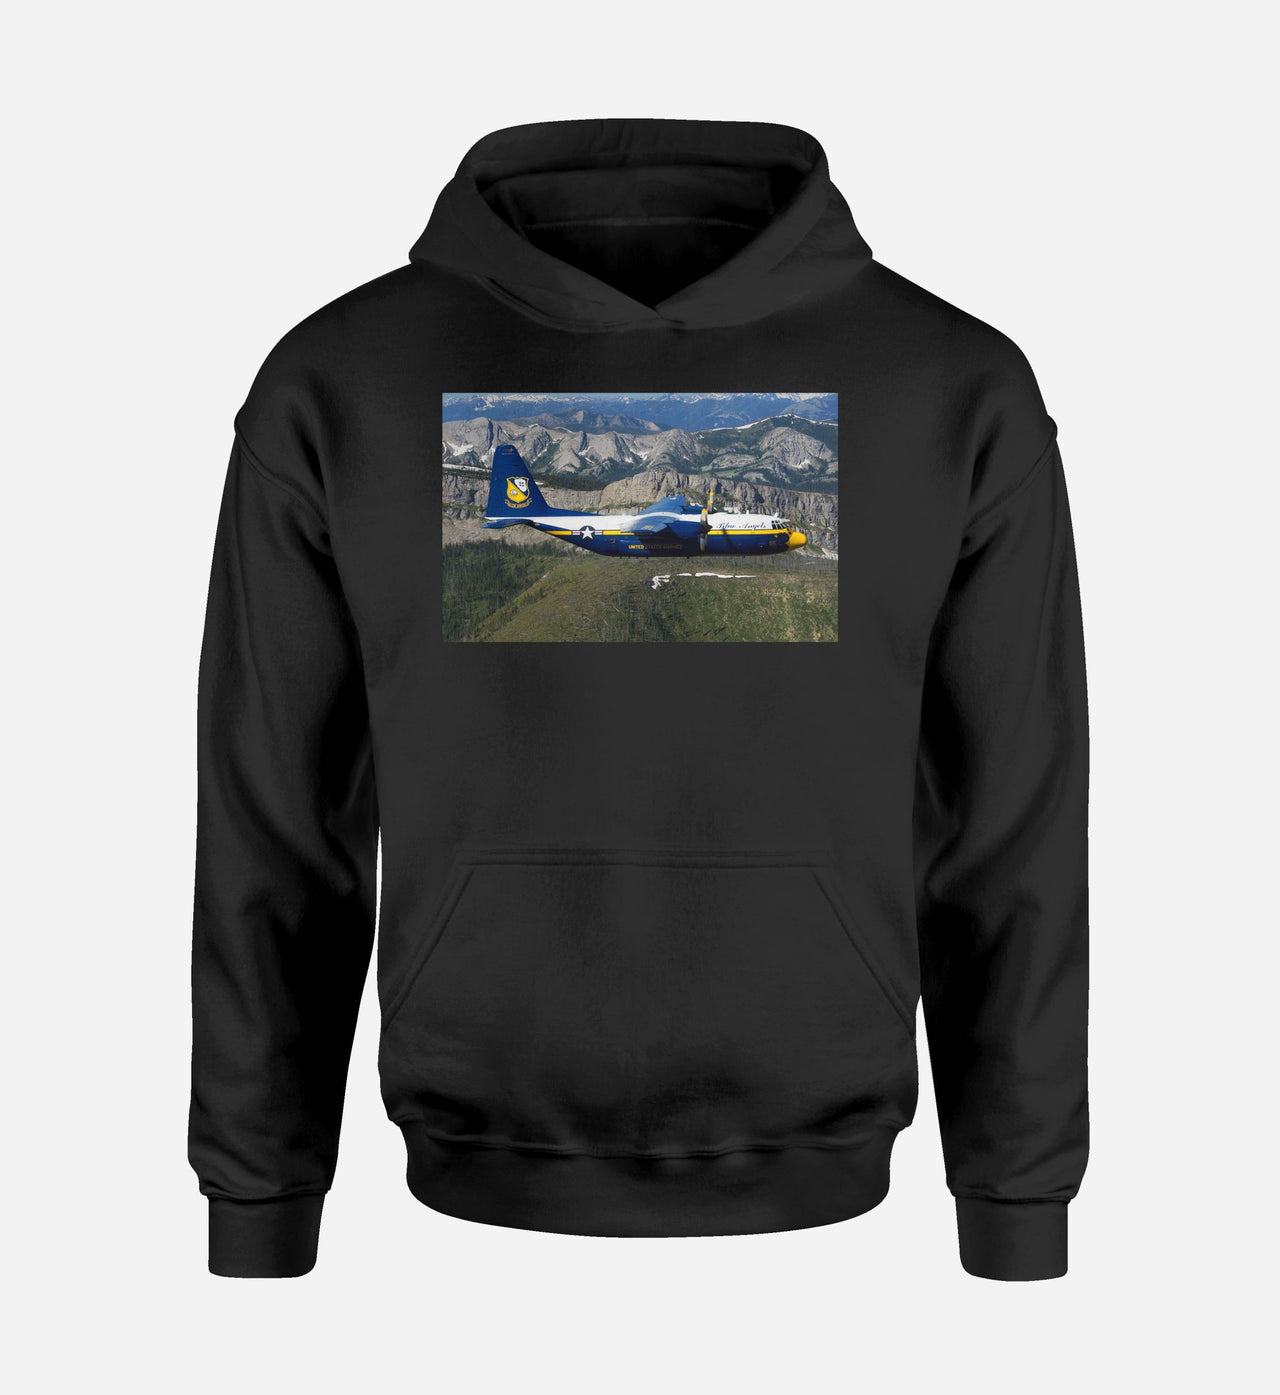 Amazing View with Blue Angels Aircraft Designed Hoodies